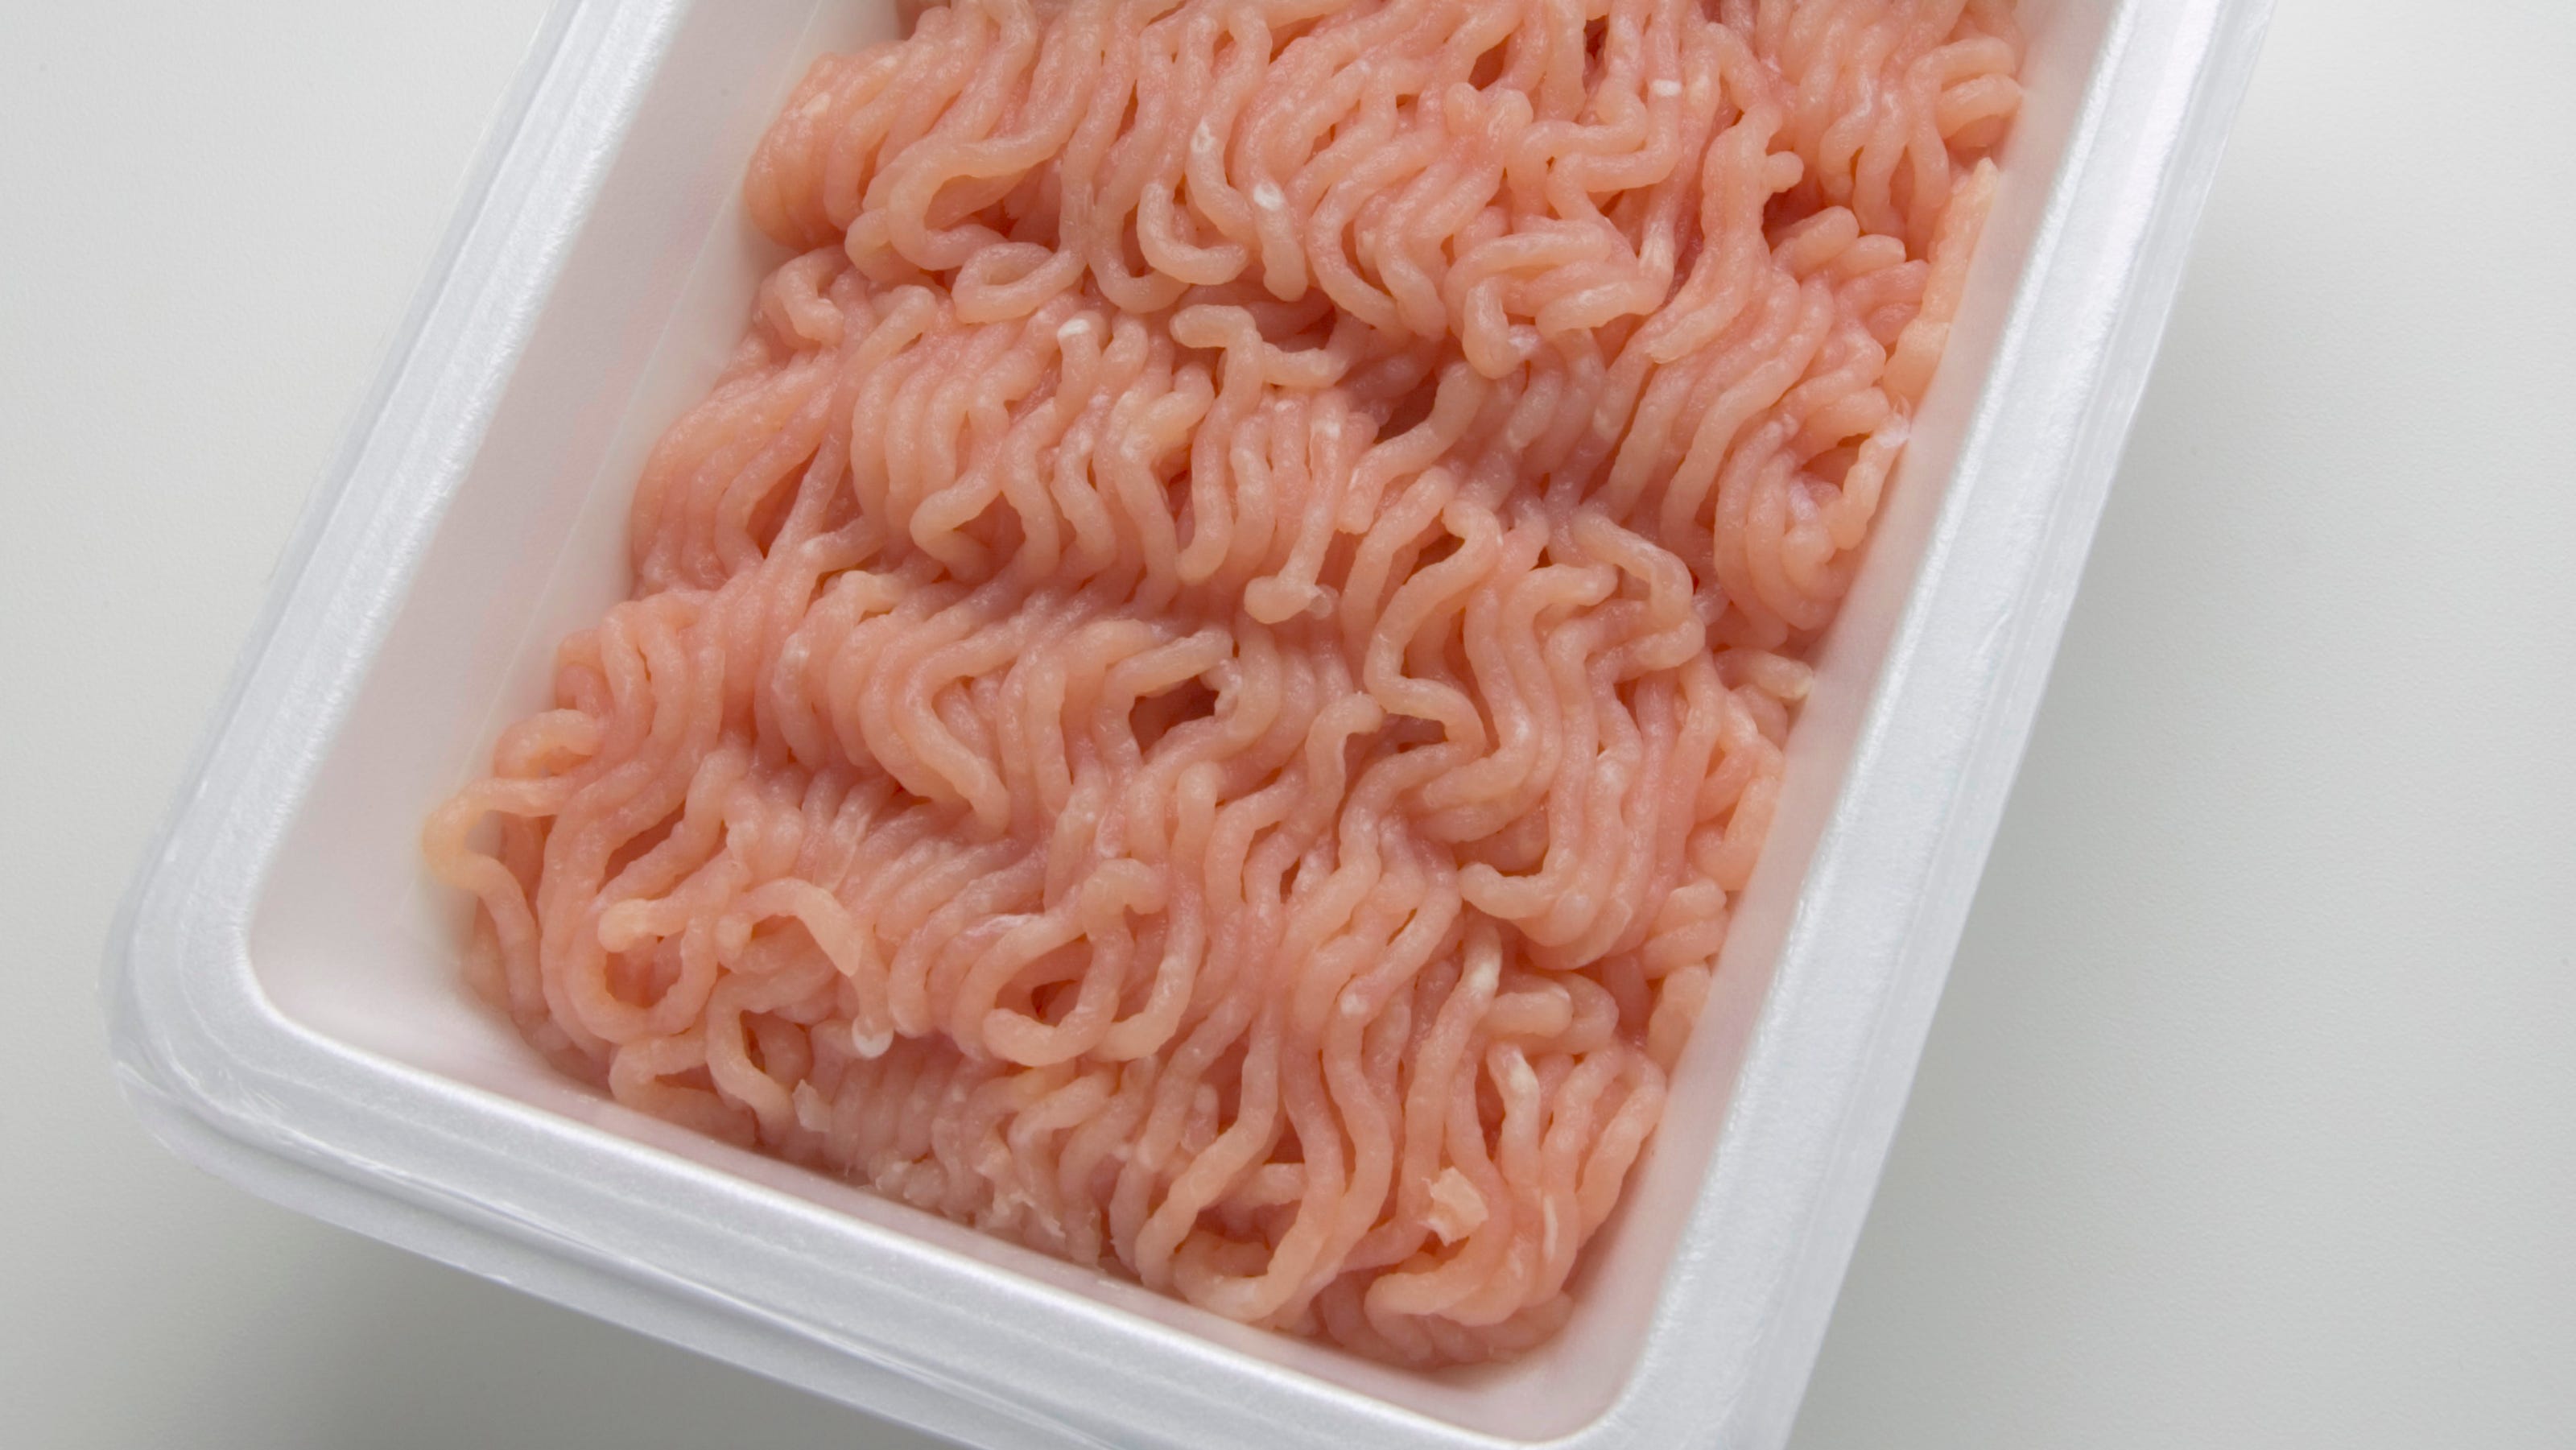 USDA issues public health alert for more than 211,000 pounds of ground turkey for possible salmonella risk - USA TODAY